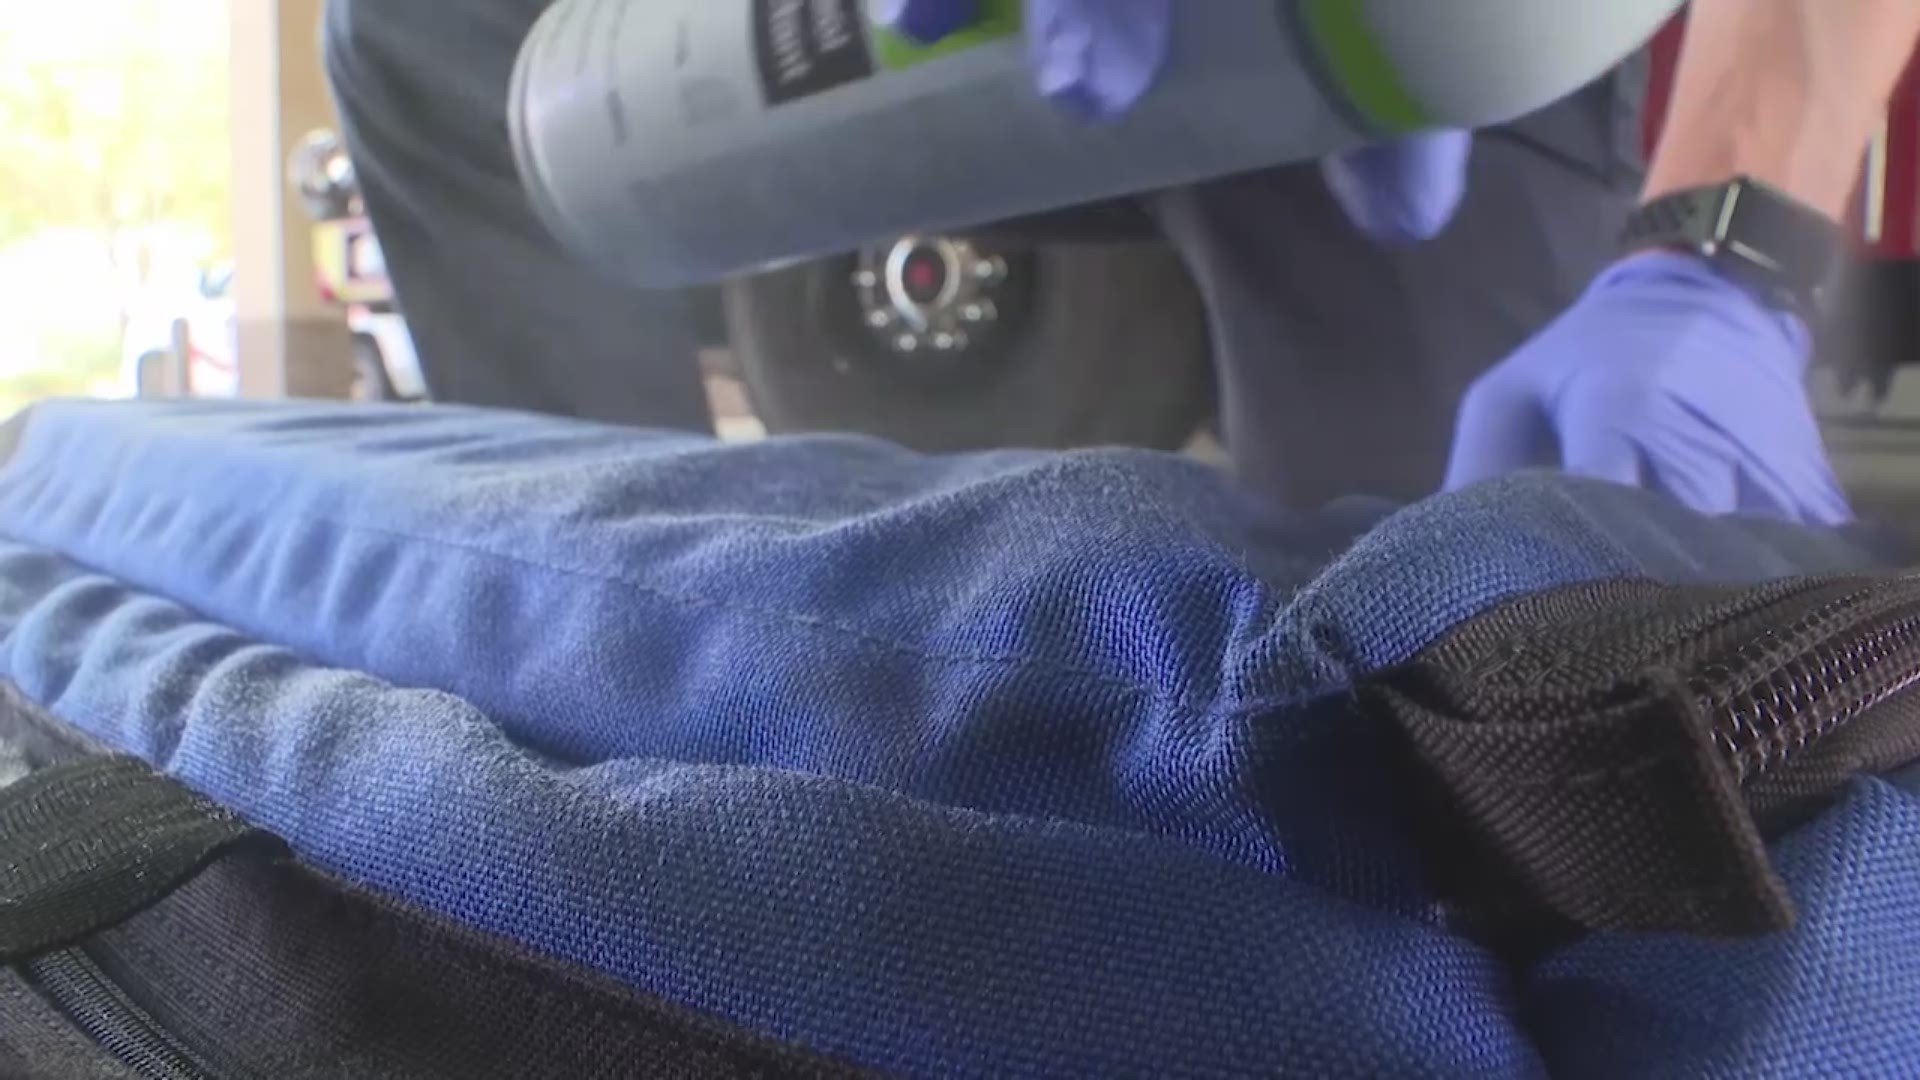 Prof. Shay Curran said he developed the waterproofing-style solution for covering fabrics back in 2011, and found new use for it due to the virus.